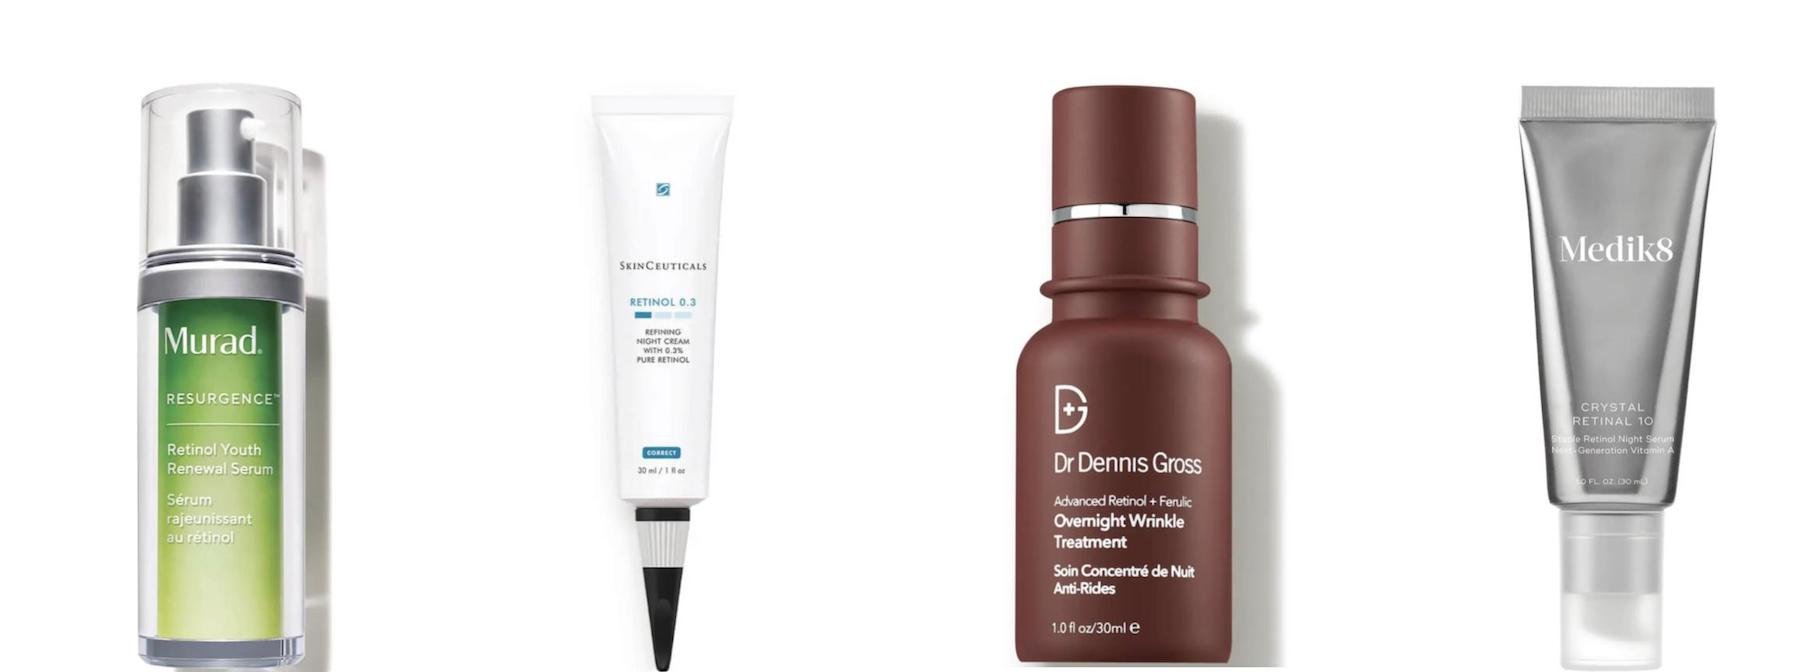 Retinol by Decade: The Formulas for Your 20s, 30s, 40s and Beyond